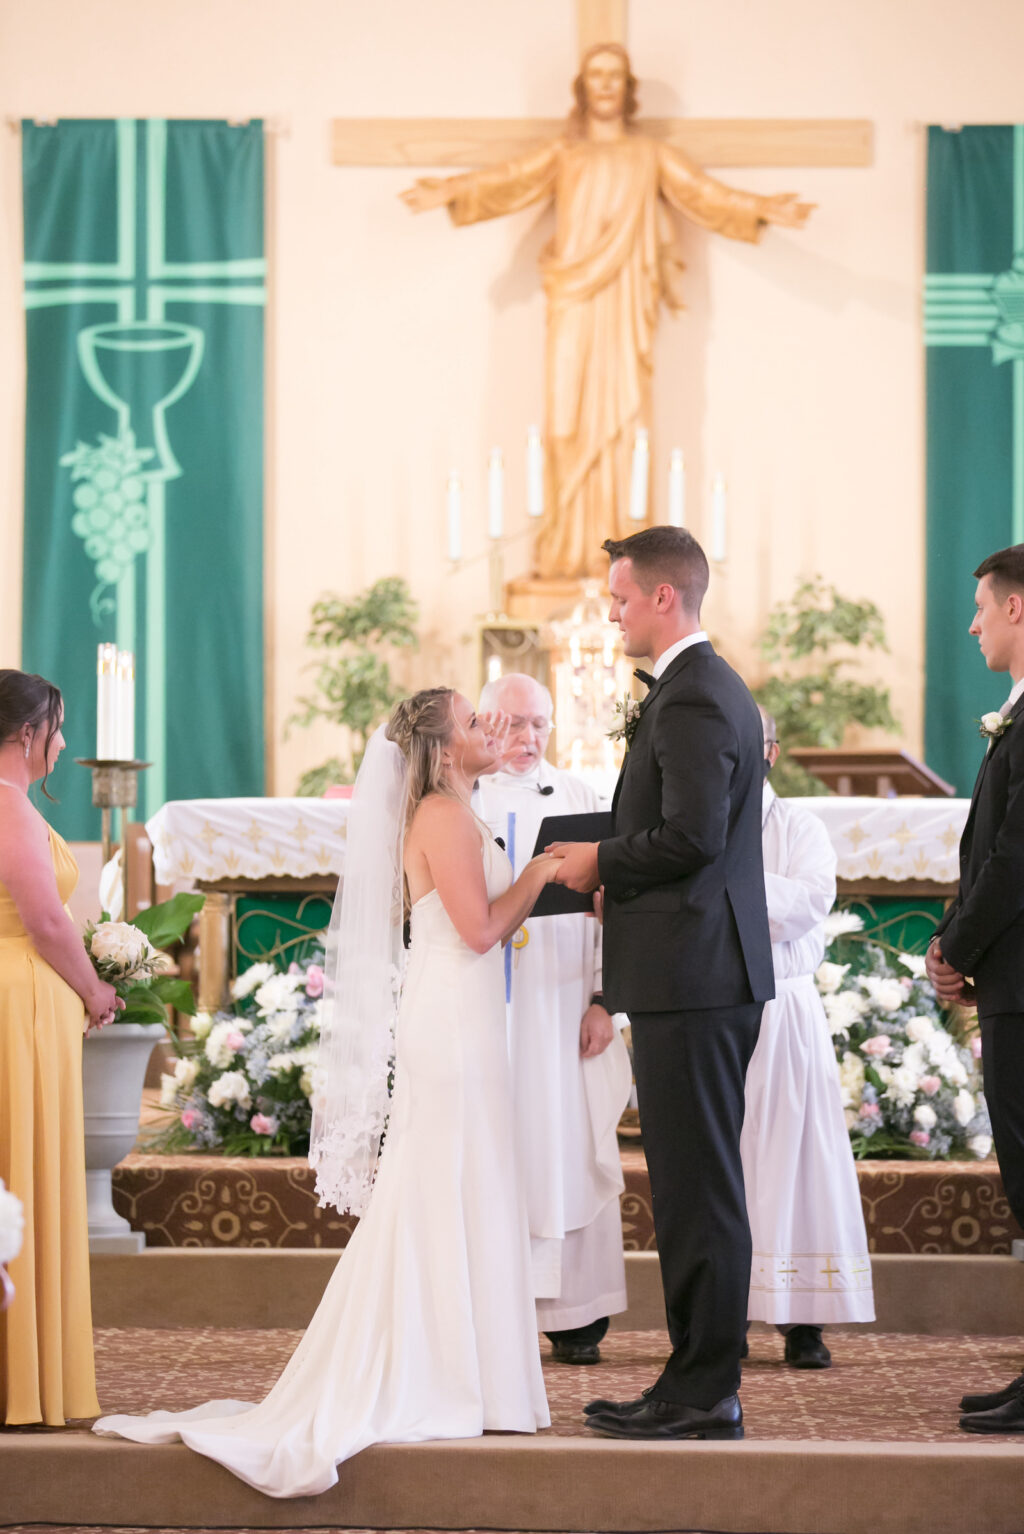 Bride and Groom Exchange Vows Wedding Portrait | South Florida Photographer Carrie Wildes Photography